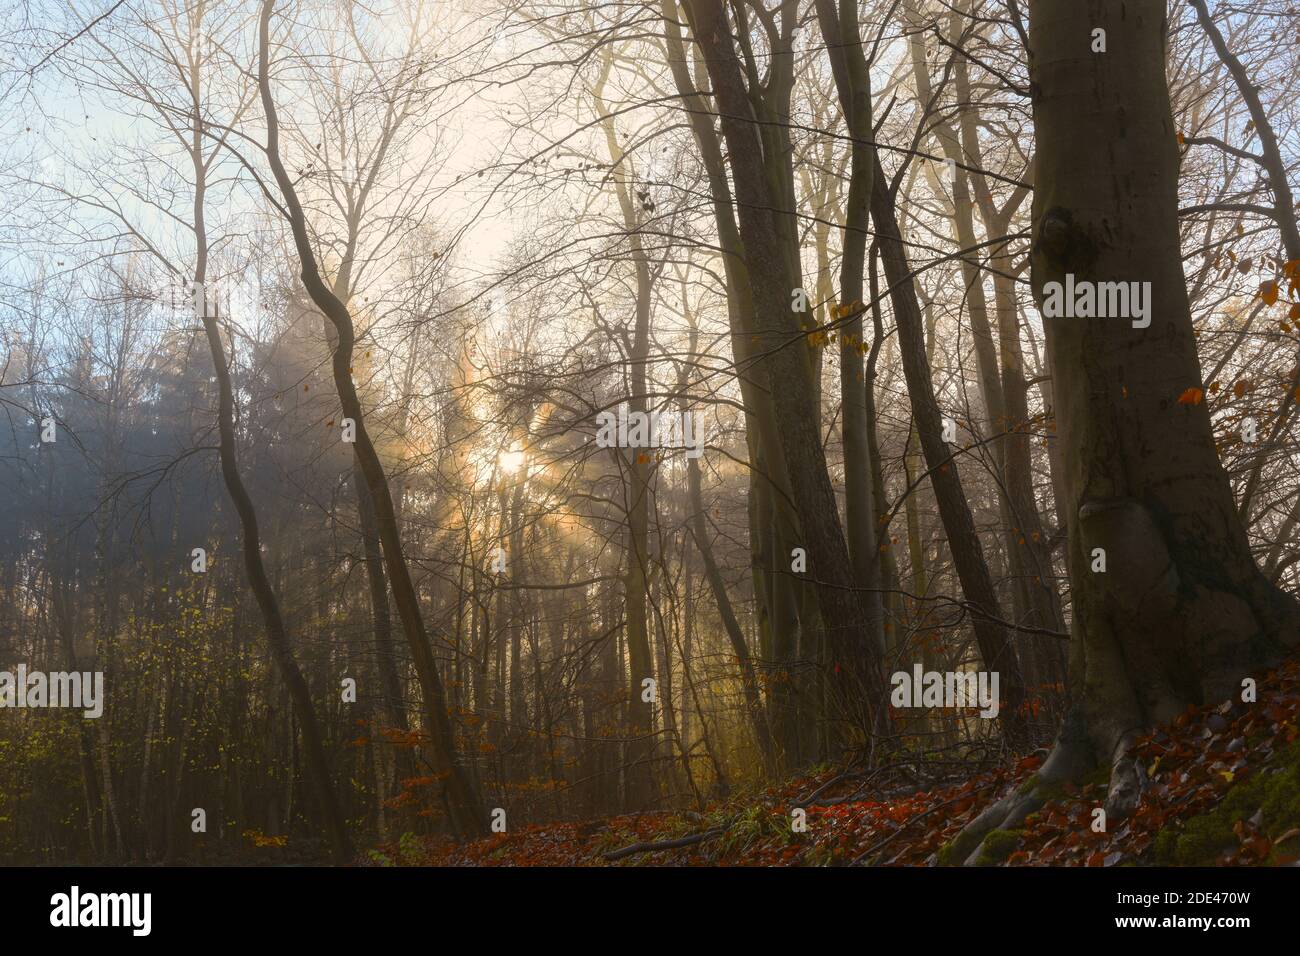 Golden sunrays are shining through a mixed forest on a hazy morning in autumn or winter, nature landscape, selected focus Stock Photo